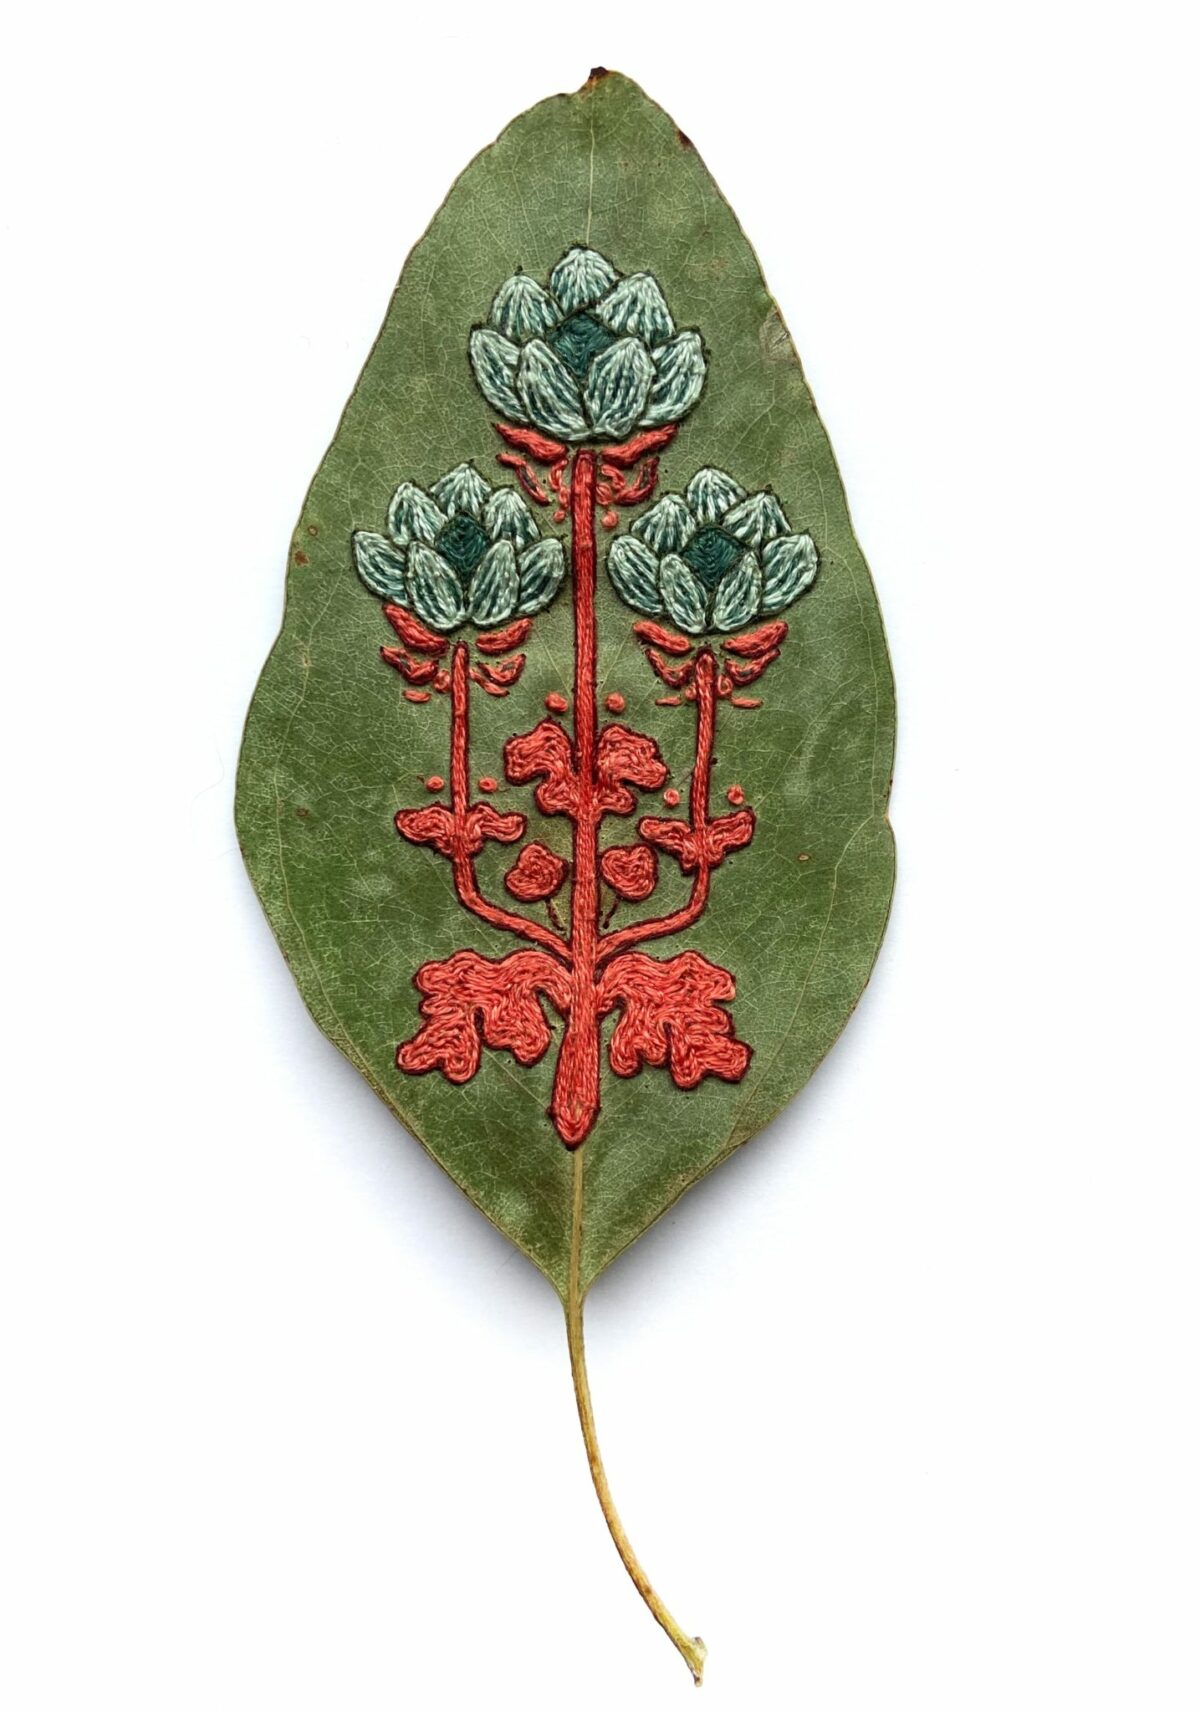 The Fascinating Embroidered Leaf Art Of Hillary Waters Fayle (3)